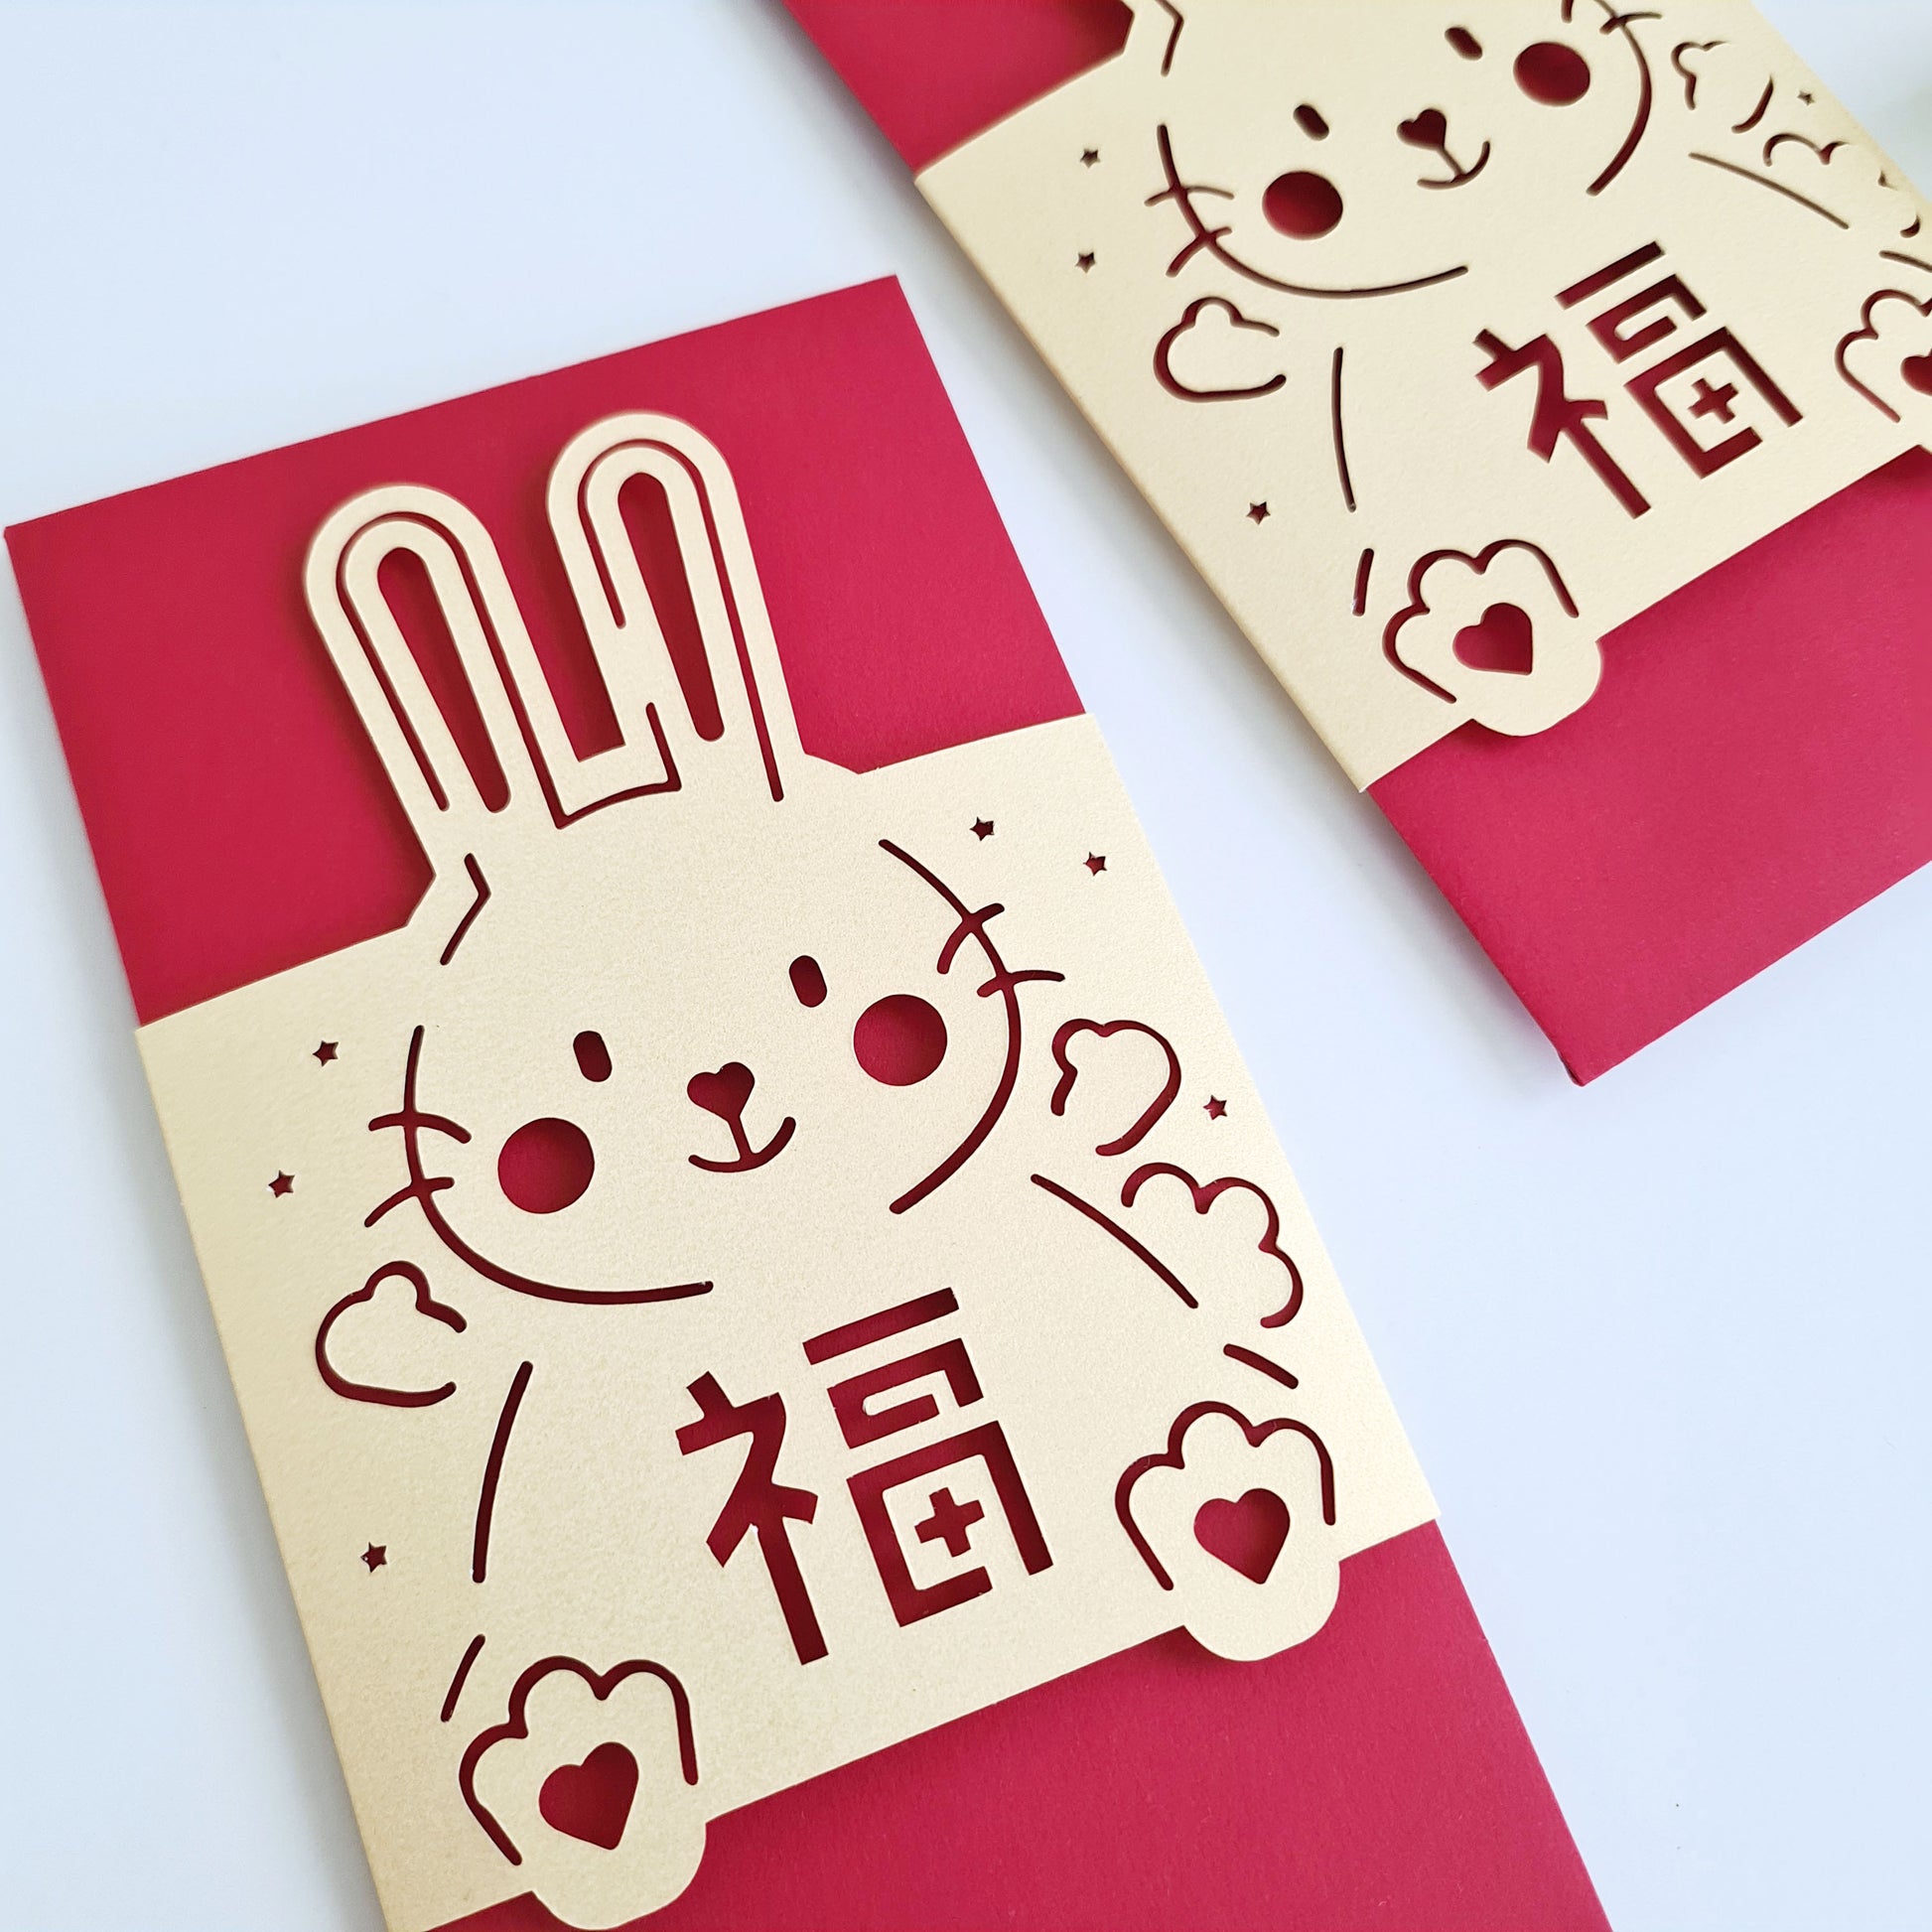 2023 Year of the Rabbit Red Envelopes, Set of 3 – HooHoo And Mouse